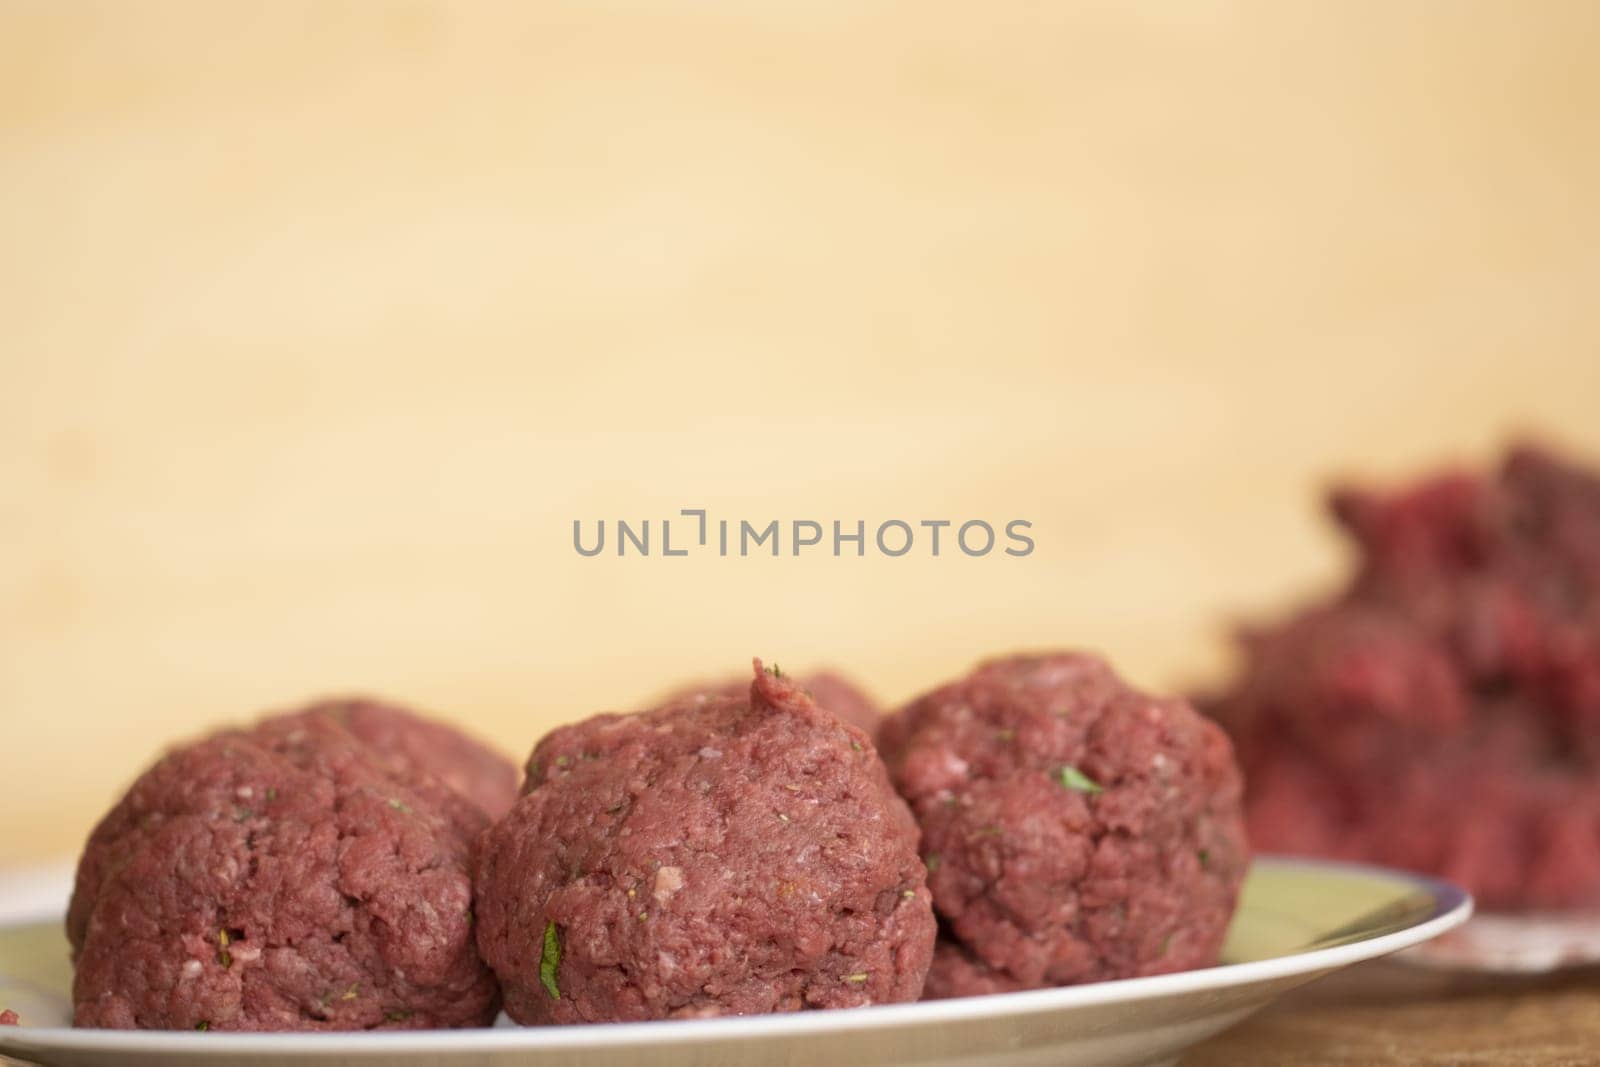 raw beef meatballs ready to be cooked